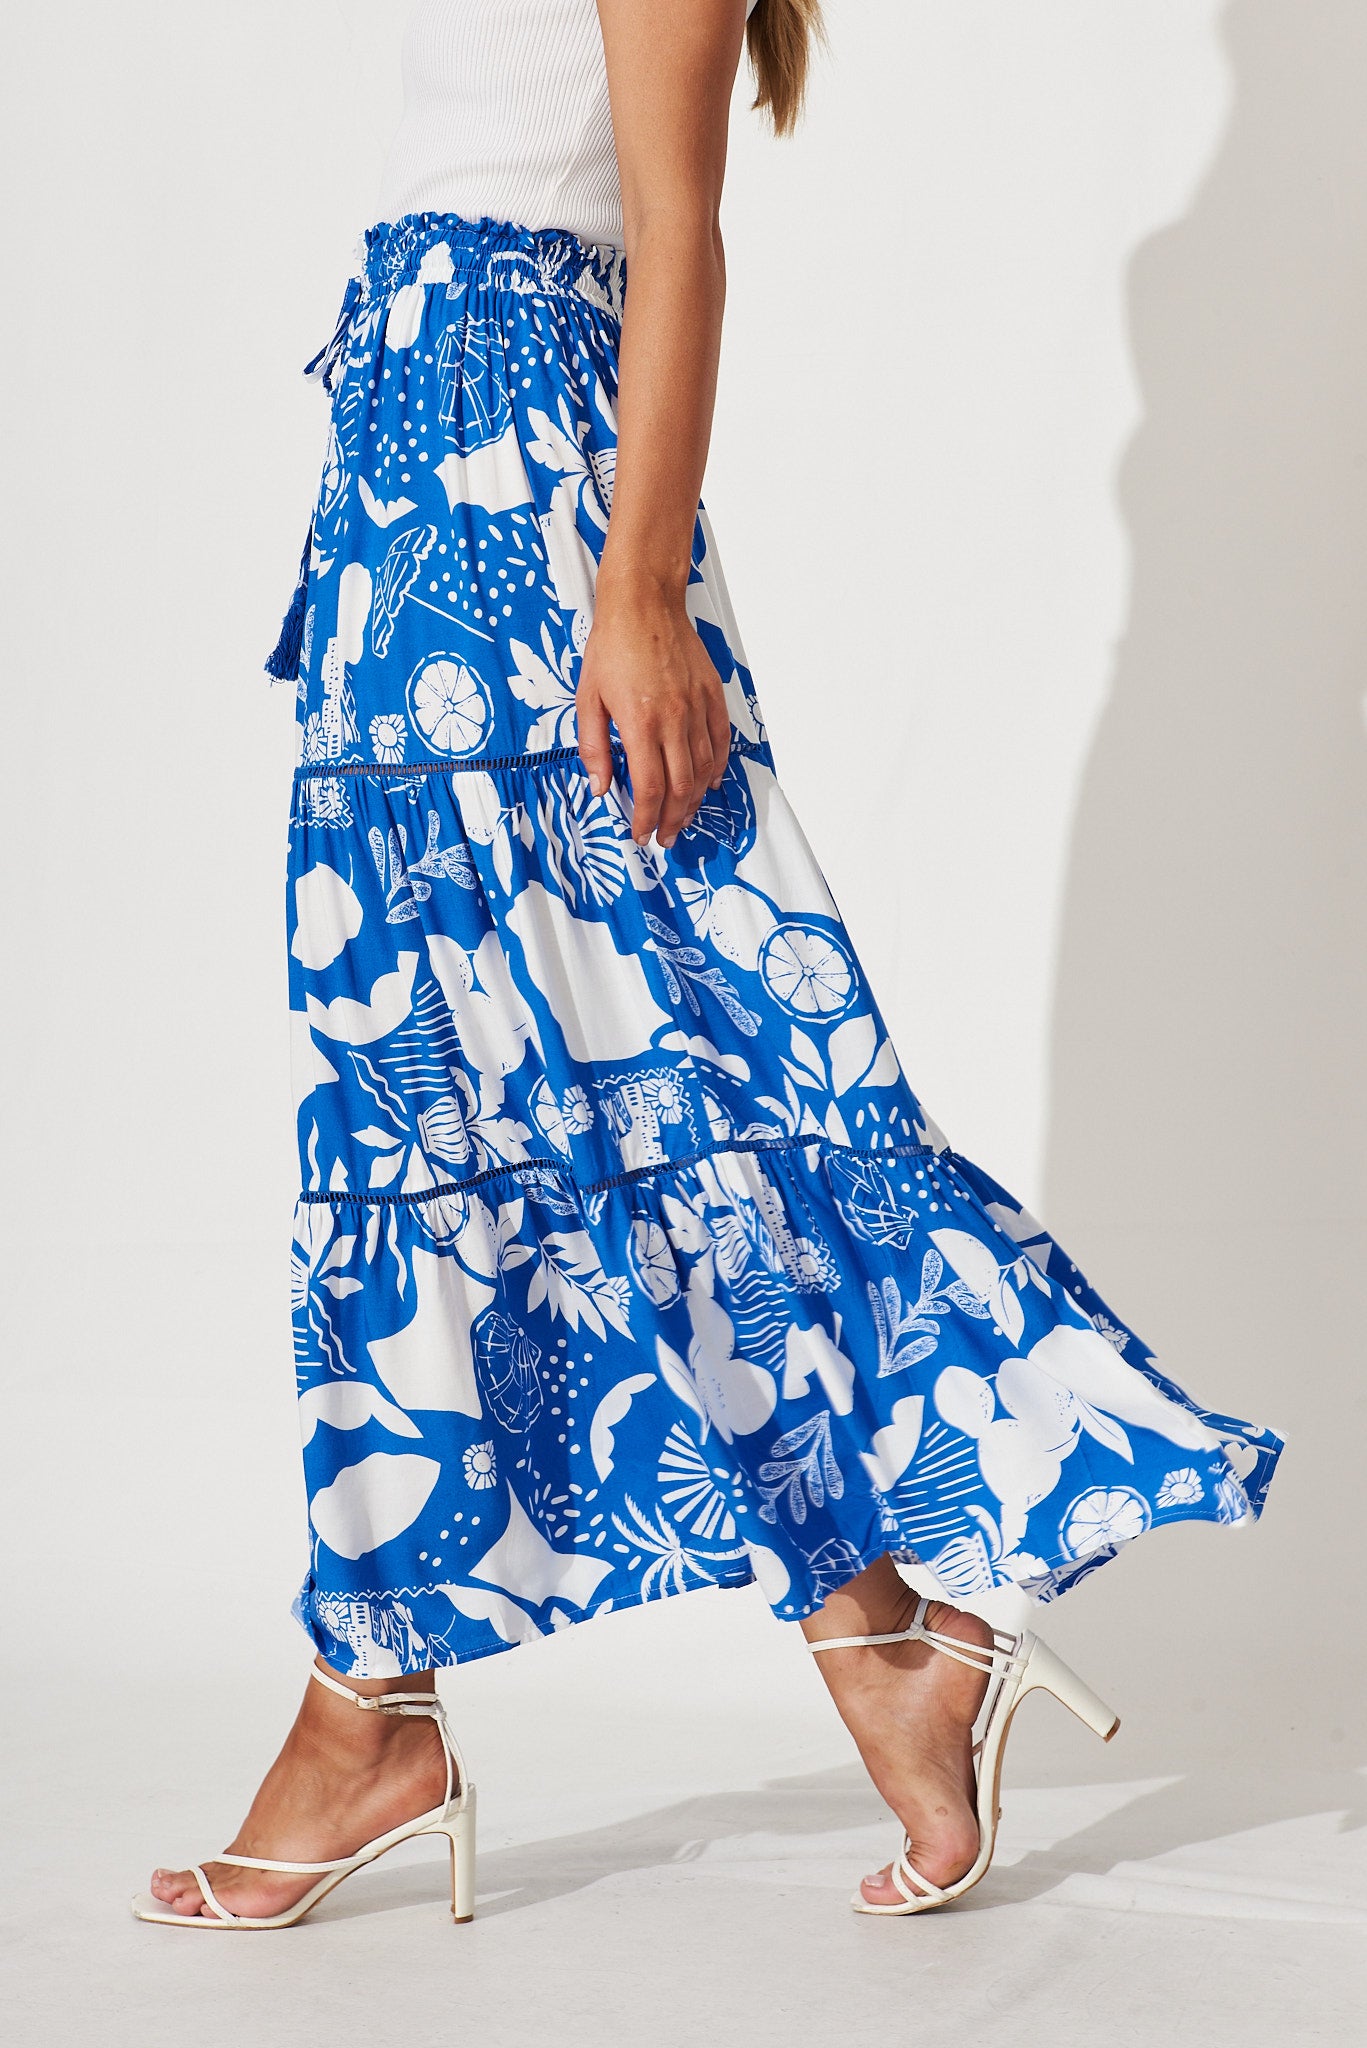 Freedom Maxi Skirt In Cobalt Blue With White Print - side